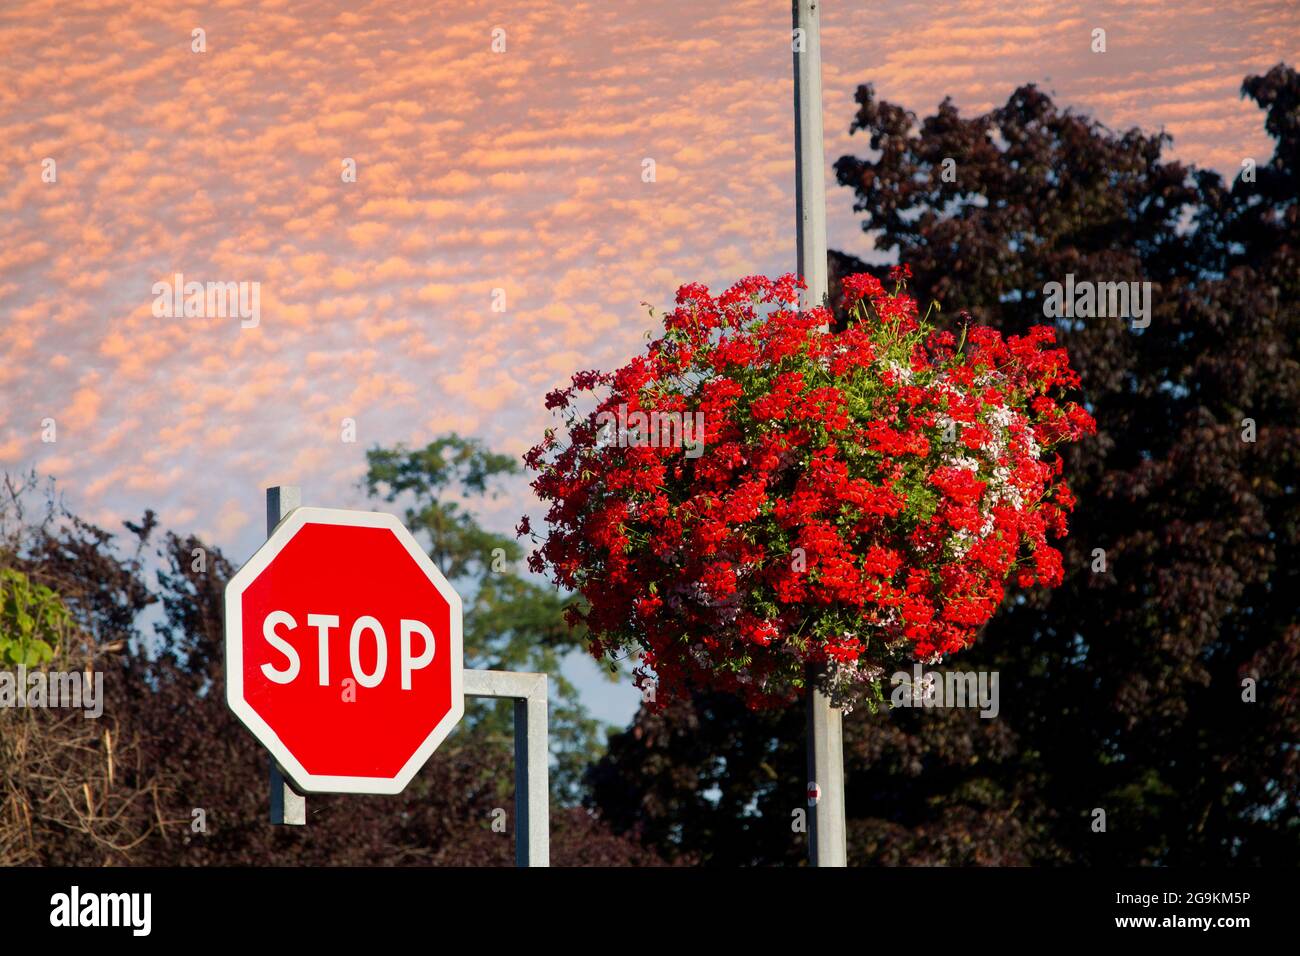 Flower and traffic signat in an alsacian villlage Stock Photo